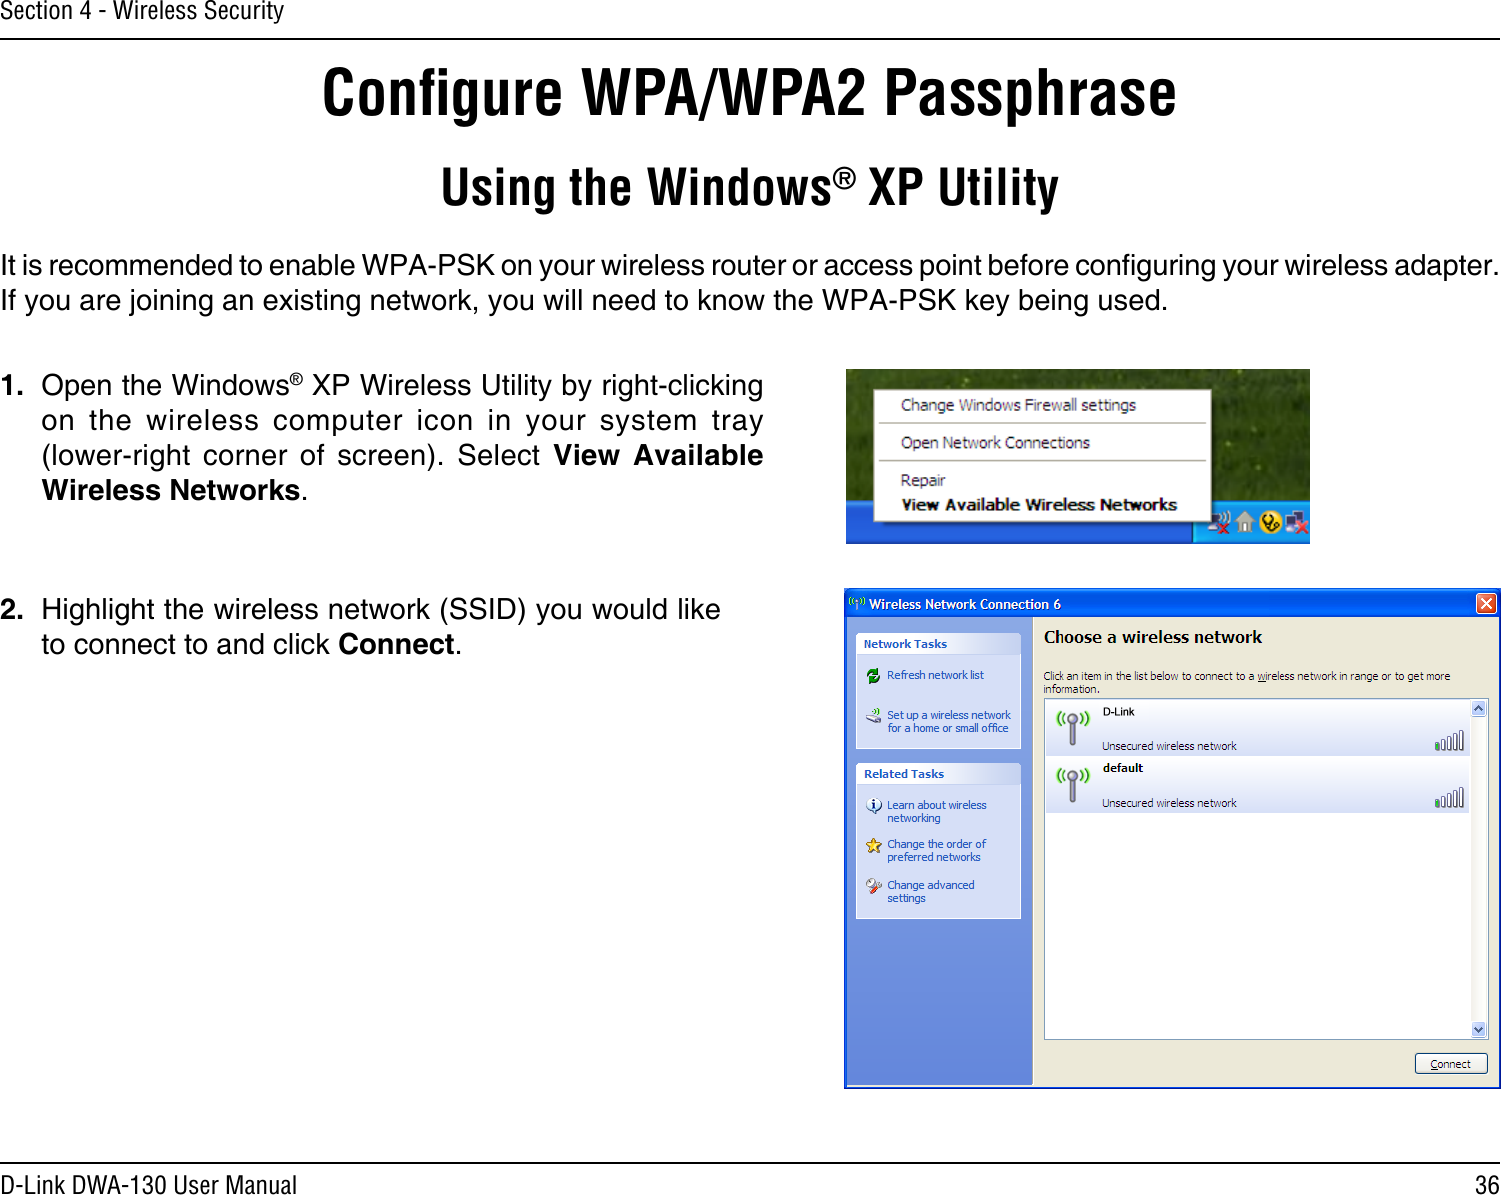 36D-Link DWA-130 User ManualSection 4 - Wireless SecurityConﬁgure WPA/WPA2 PassphraseUsing the Windows® XP UtilityIt is recommended to enable WPA-PSK on your wireless router or access point before conguring your wireless adapter. If you are joining an existing network, you will need to know the WPA-PSK key being used.2.  Highlight the wireless network (SSID) you would like to connect to and click Connect.1.  Open the Windows® XP Wireless Utility by right-clicking on  the  wireless  computer  icon  in  your  system  tray  (lower-right  corner  of  screen).  Select  View  Available Wireless Networks. 